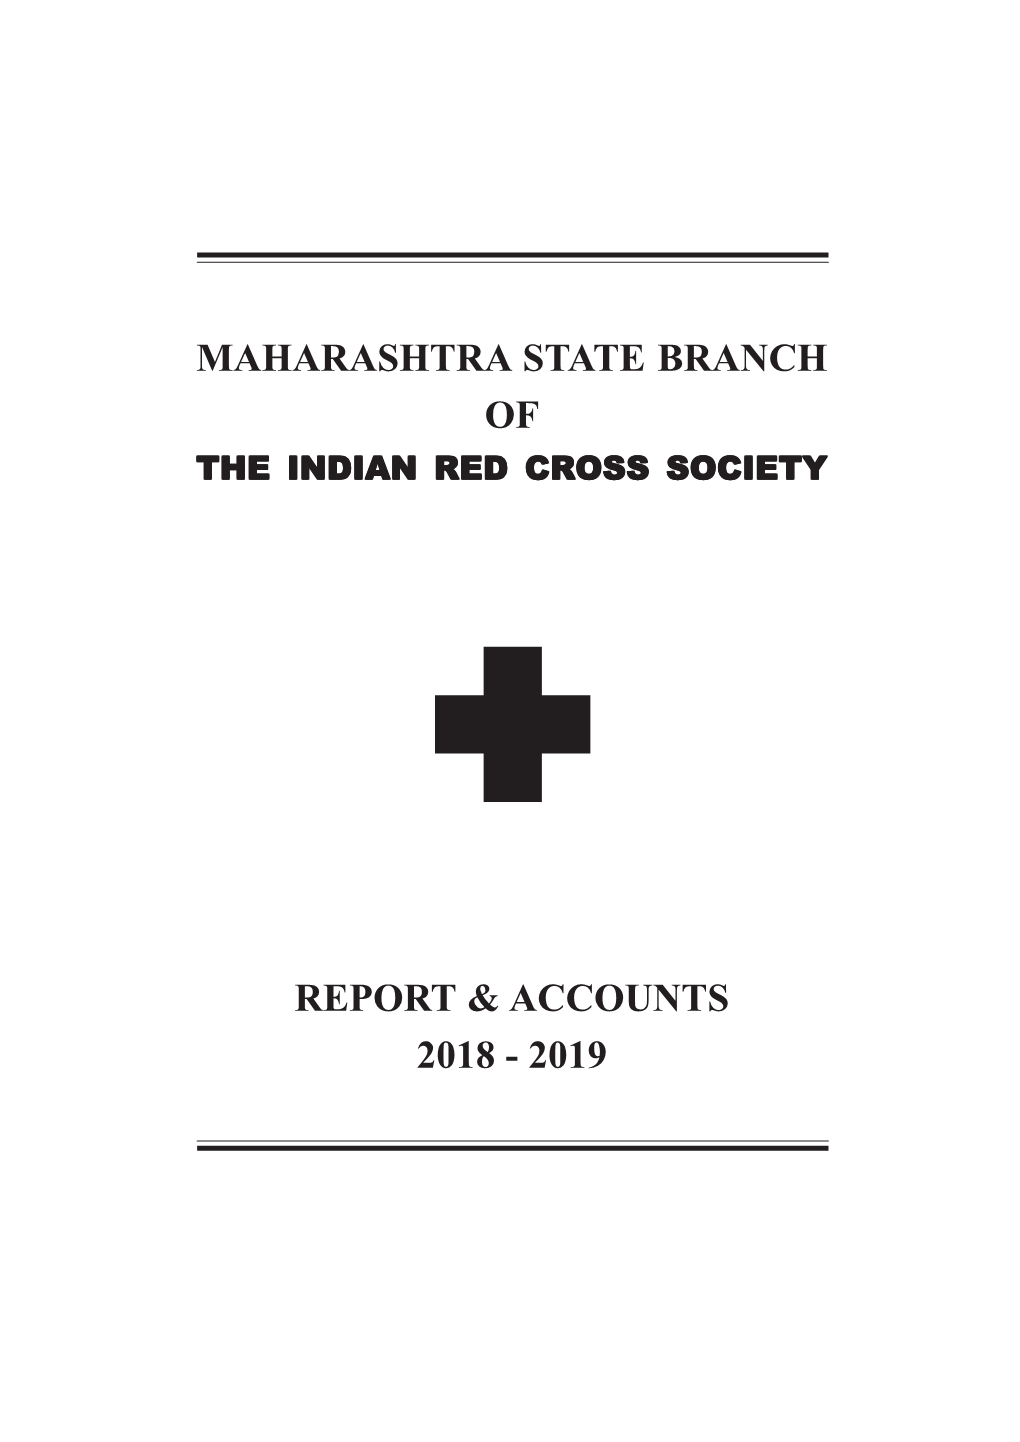 Maharashtra State Branch of Report & Accounts 2018